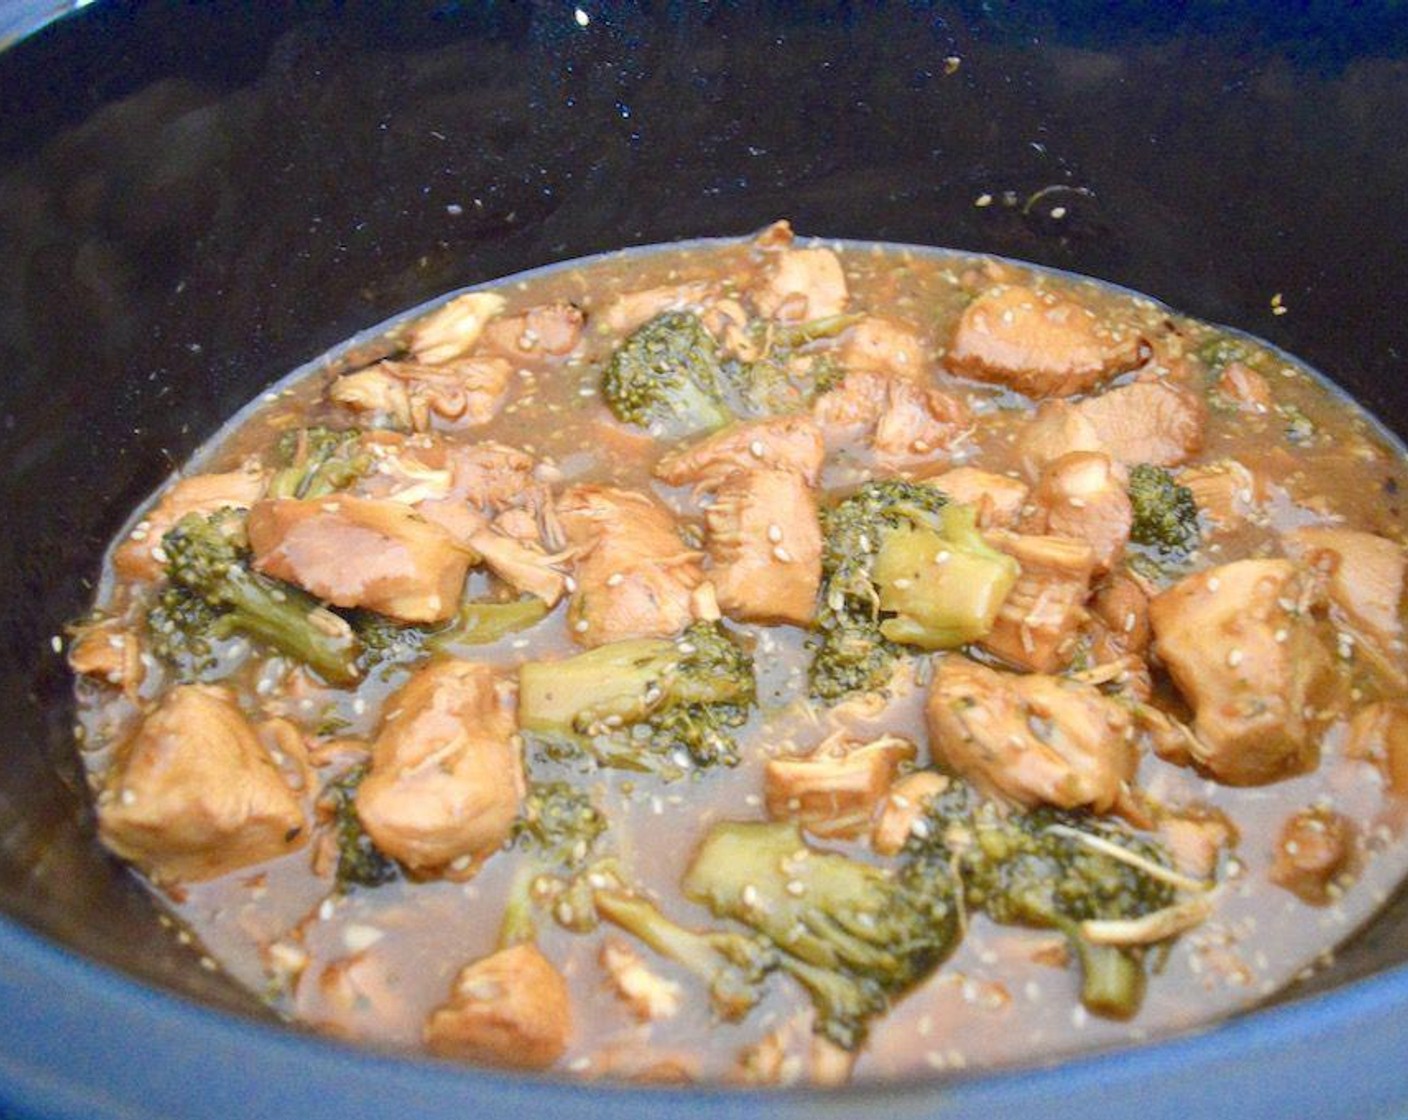 step 4 When the 3 hours are up, add the Broccoli (1 head) and the final bit of Corn Starch (3/4 tsp) to thicken it all more. Seal the slow cooker again and let it all cook for another hour to hour and a half.